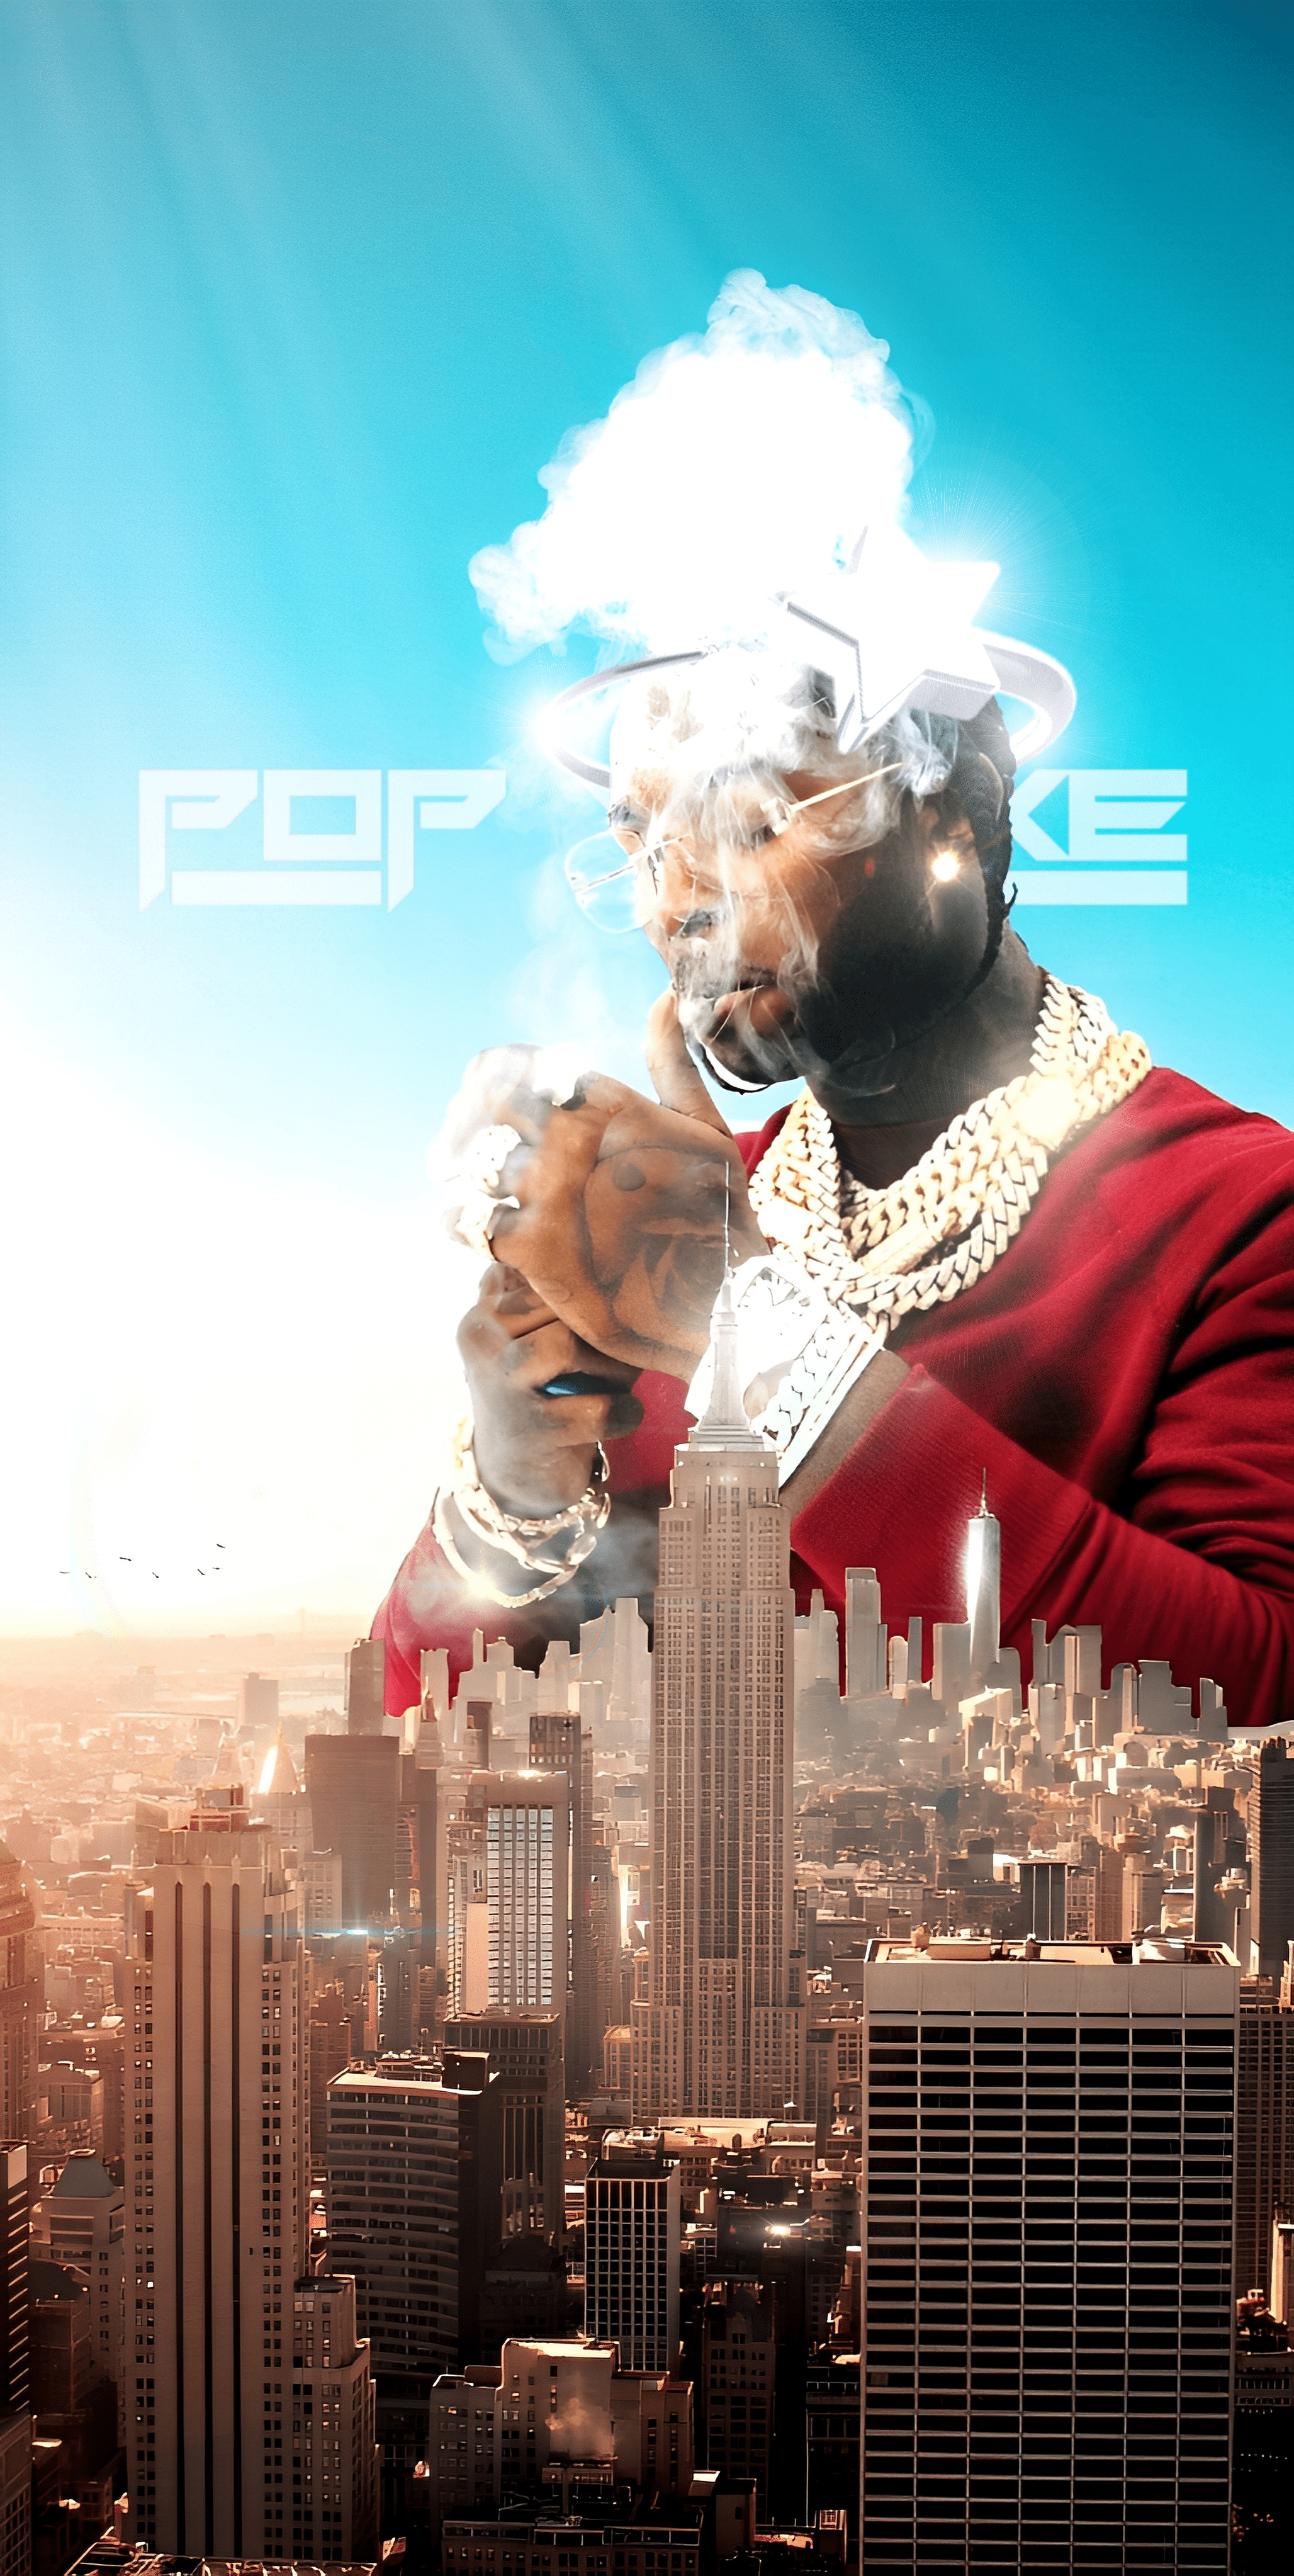 Another Pop Smoke Wallpaper that i made today